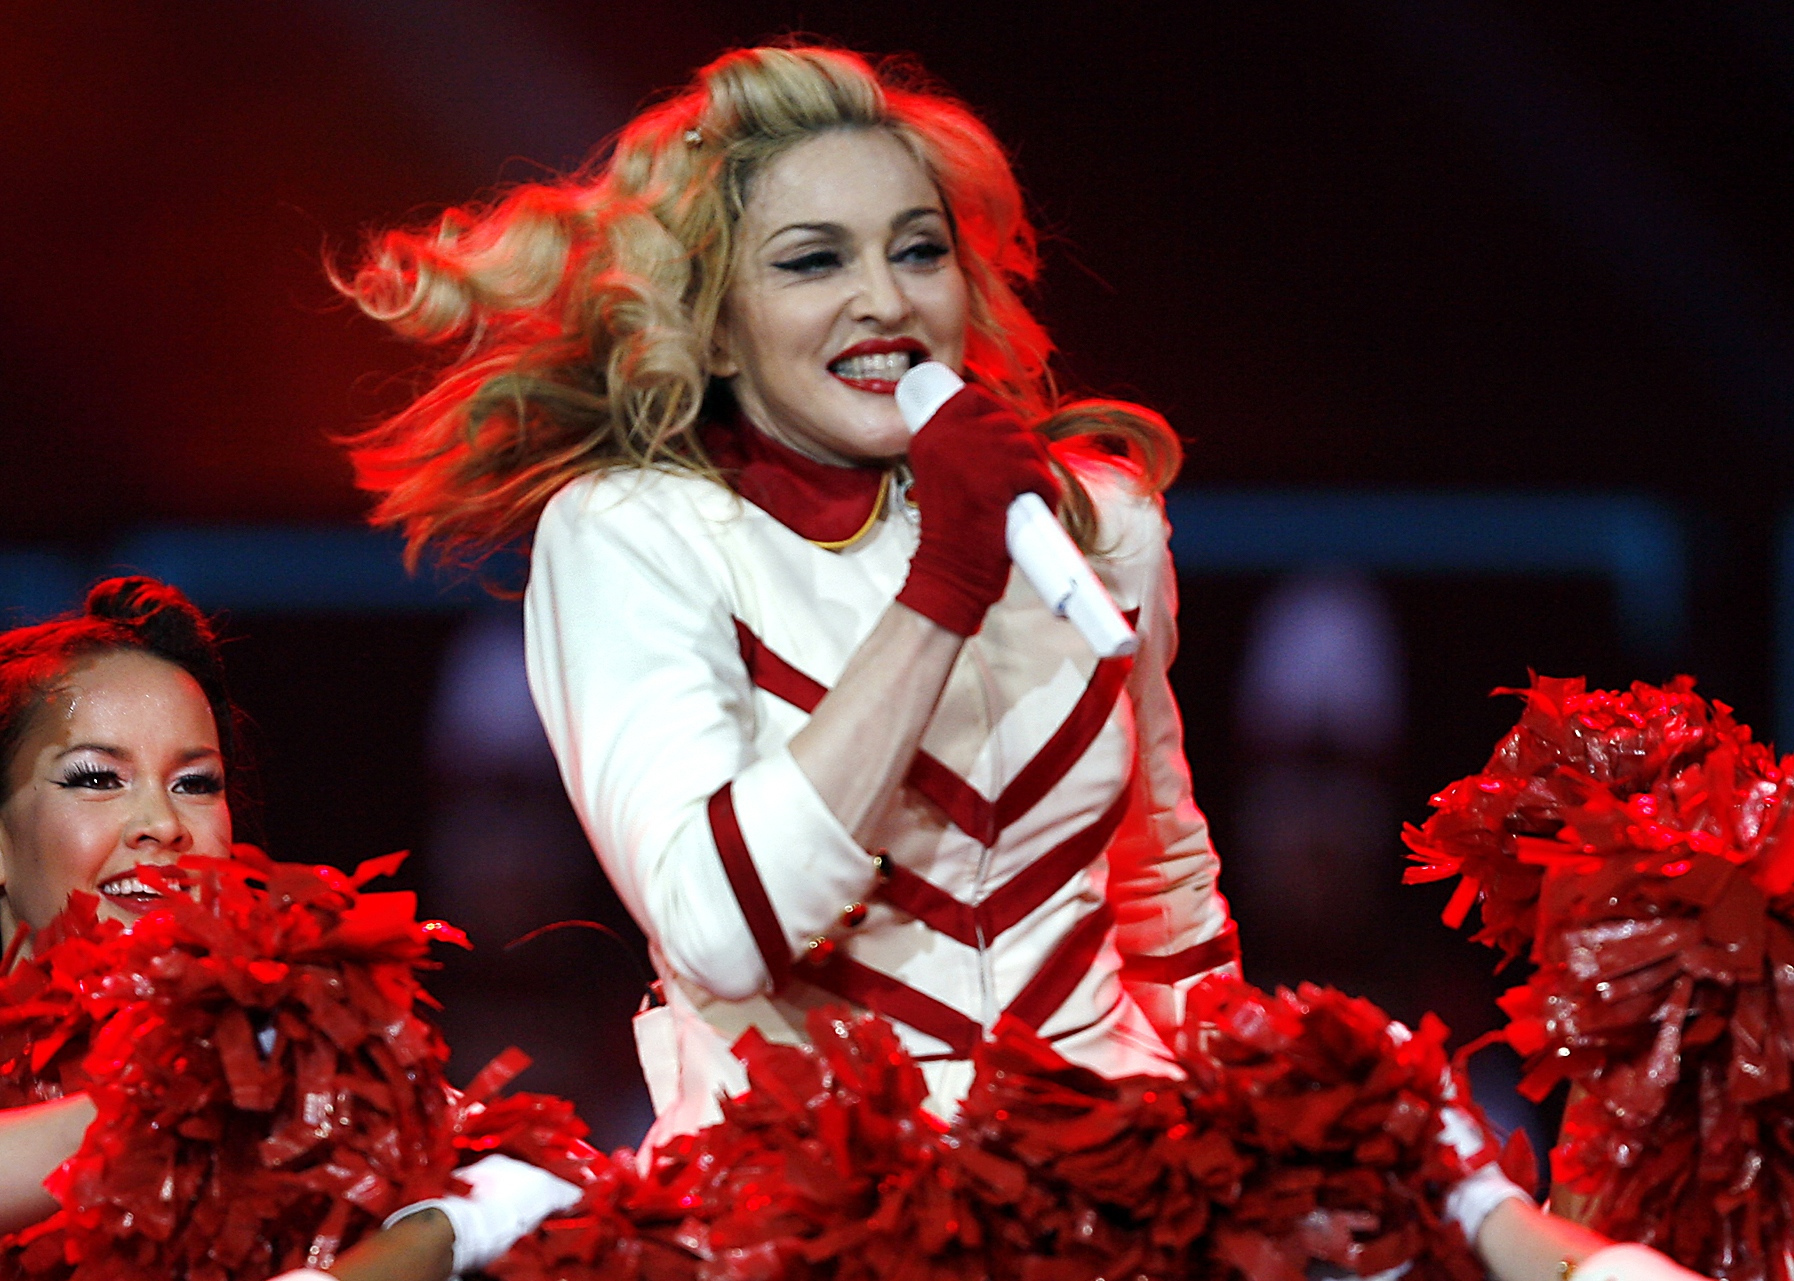 FILE - In this Nov. 8, 2012, file photo, Madonna performs at the Joe Louis Arena in Detroit. Madonna, who was "inspired" during a recent visit to Detroit, is donating money toward the construction of a new youth boxing gym and buying iPods, iPads and other supplies for students at a charter school in her hometown, according to a news release issued by the music icon's publicist Monday, June 30, 2014. The statement said Madonna's donations to three Detroit organizations represent "the first phase of a long-term commitment to" the city. (Photo by Gary Malerba/Invision/AP, file) (Gary Malerba&mdash;Gary Malerba/Invision/AP)